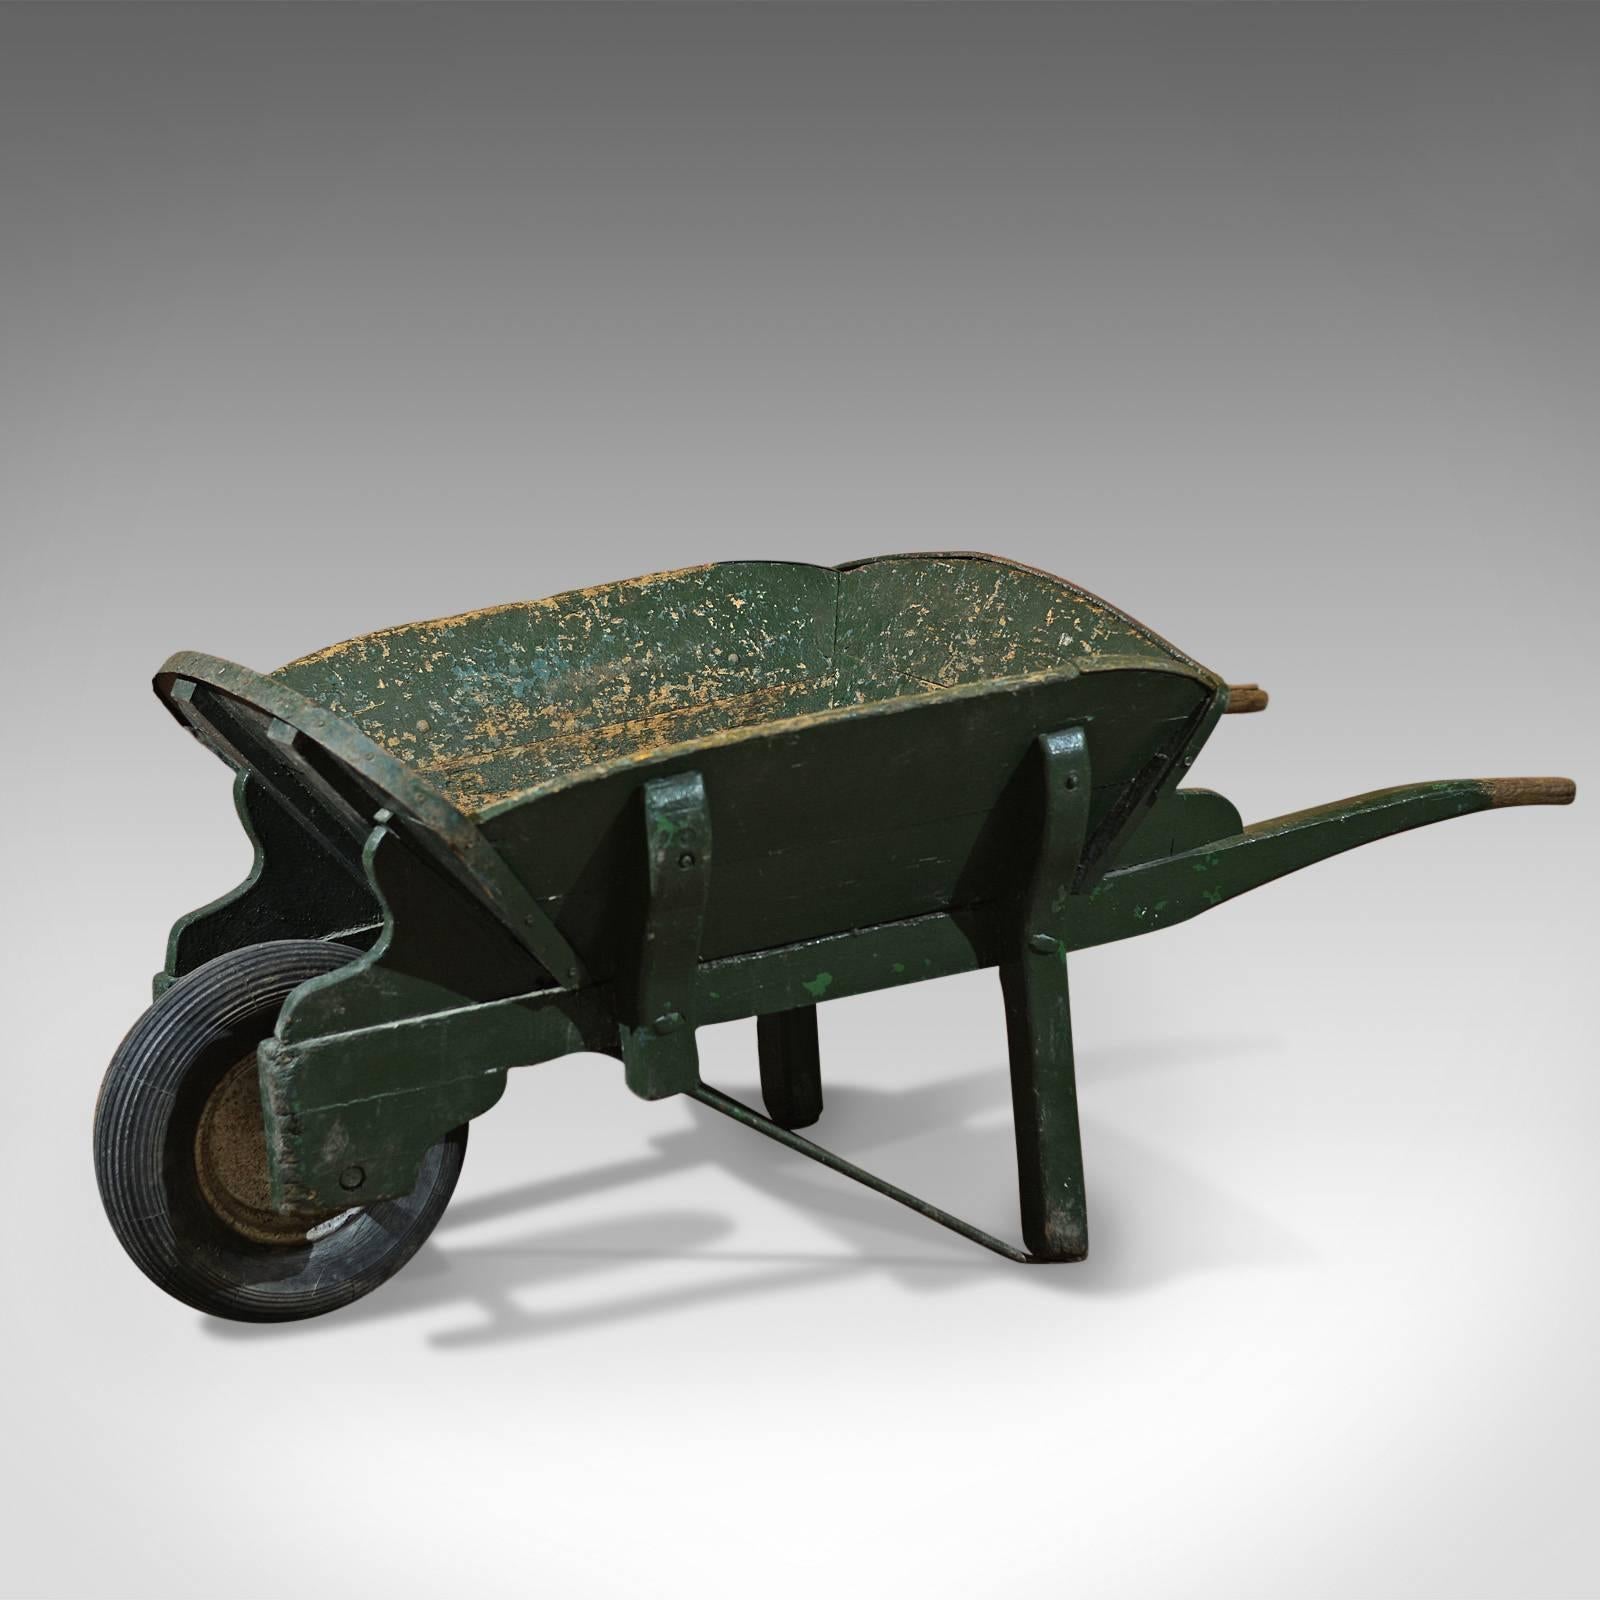 This is an antique, green Victorian gentleman's wheelbarrow.

A large and fine example, sturdily constructed from ash, iron bound and strengthened by robust struts, supports and brackets, it carries with it all the hallmarks of a long and useful